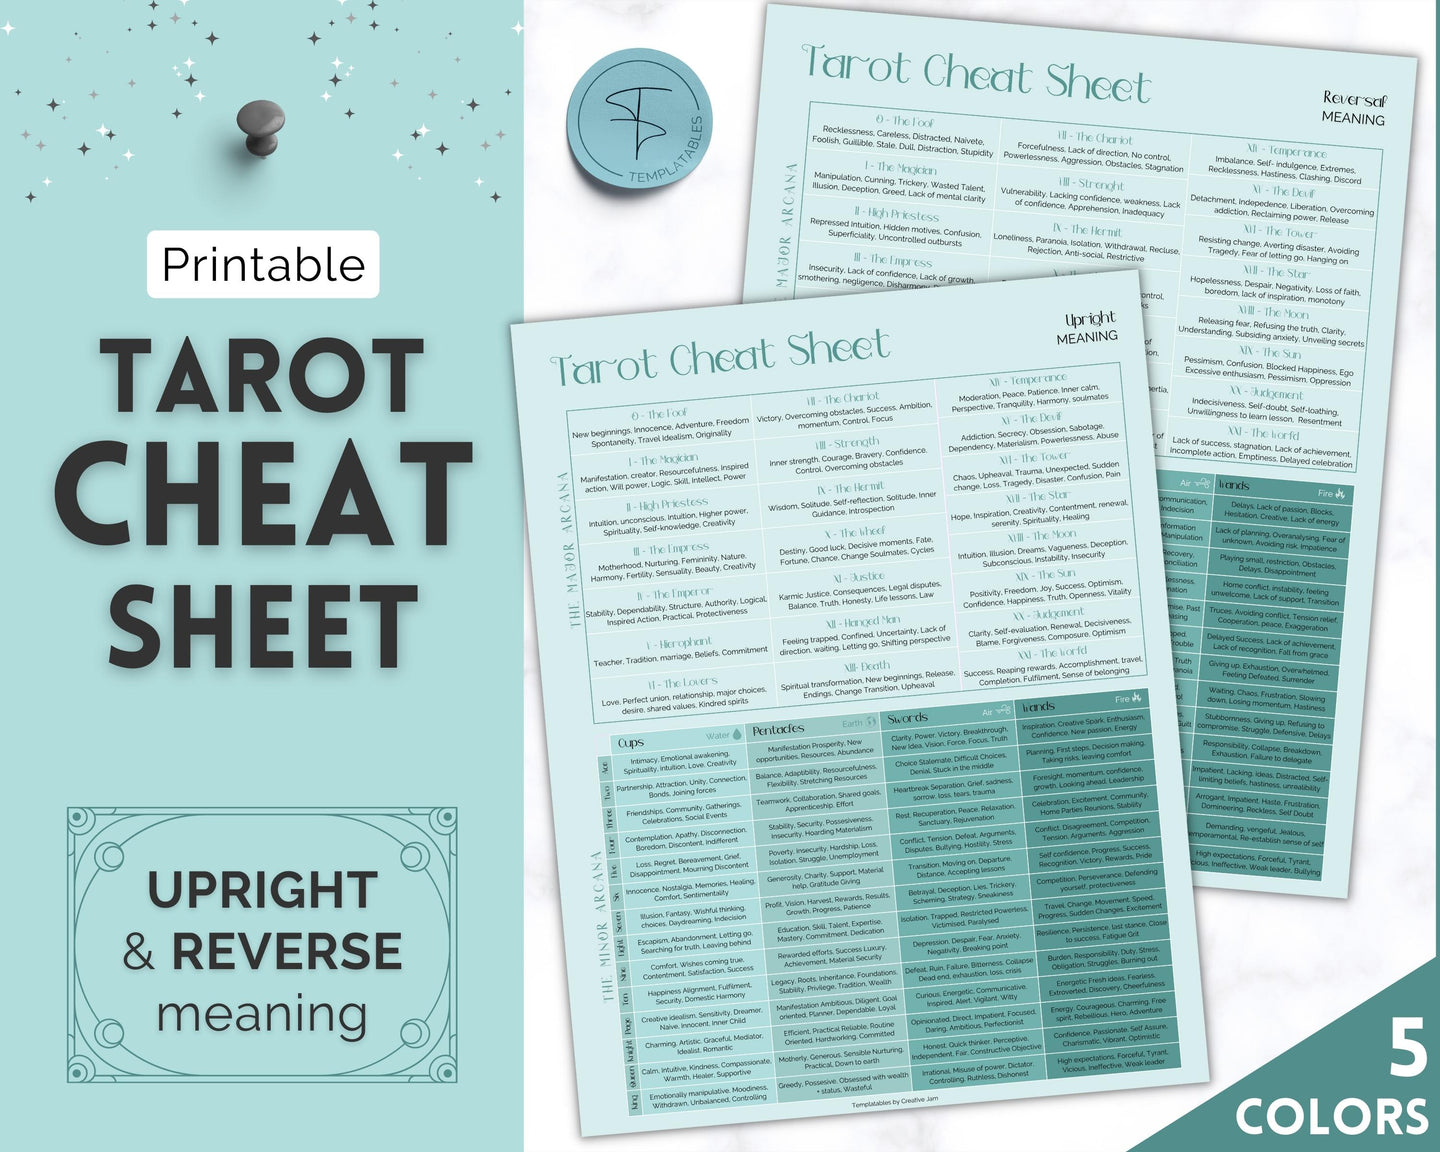 Tarot Cheat Sheet Printable |  Learn Tarot Card Readings for Beginners, Tarot Spreads, Upright & Reverse meanings | Multicolor